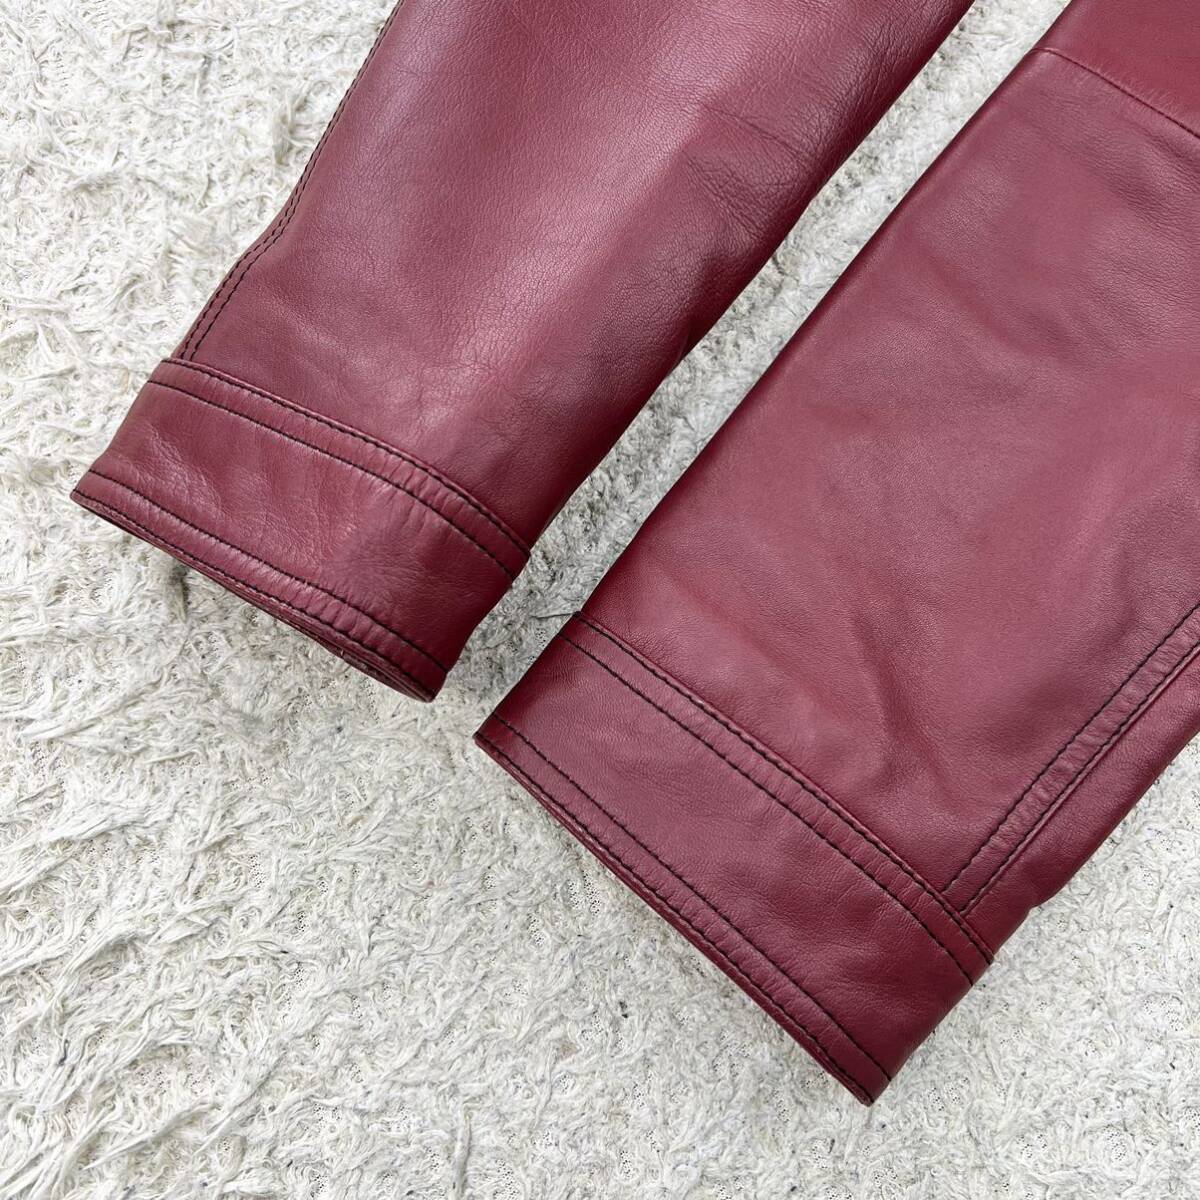  unused class!!! rose si[ emperor. ..]barassi rider's jacket 46 L sheep leather ram leather lining total pattern quilting illusion one class goods * knitting red spring 